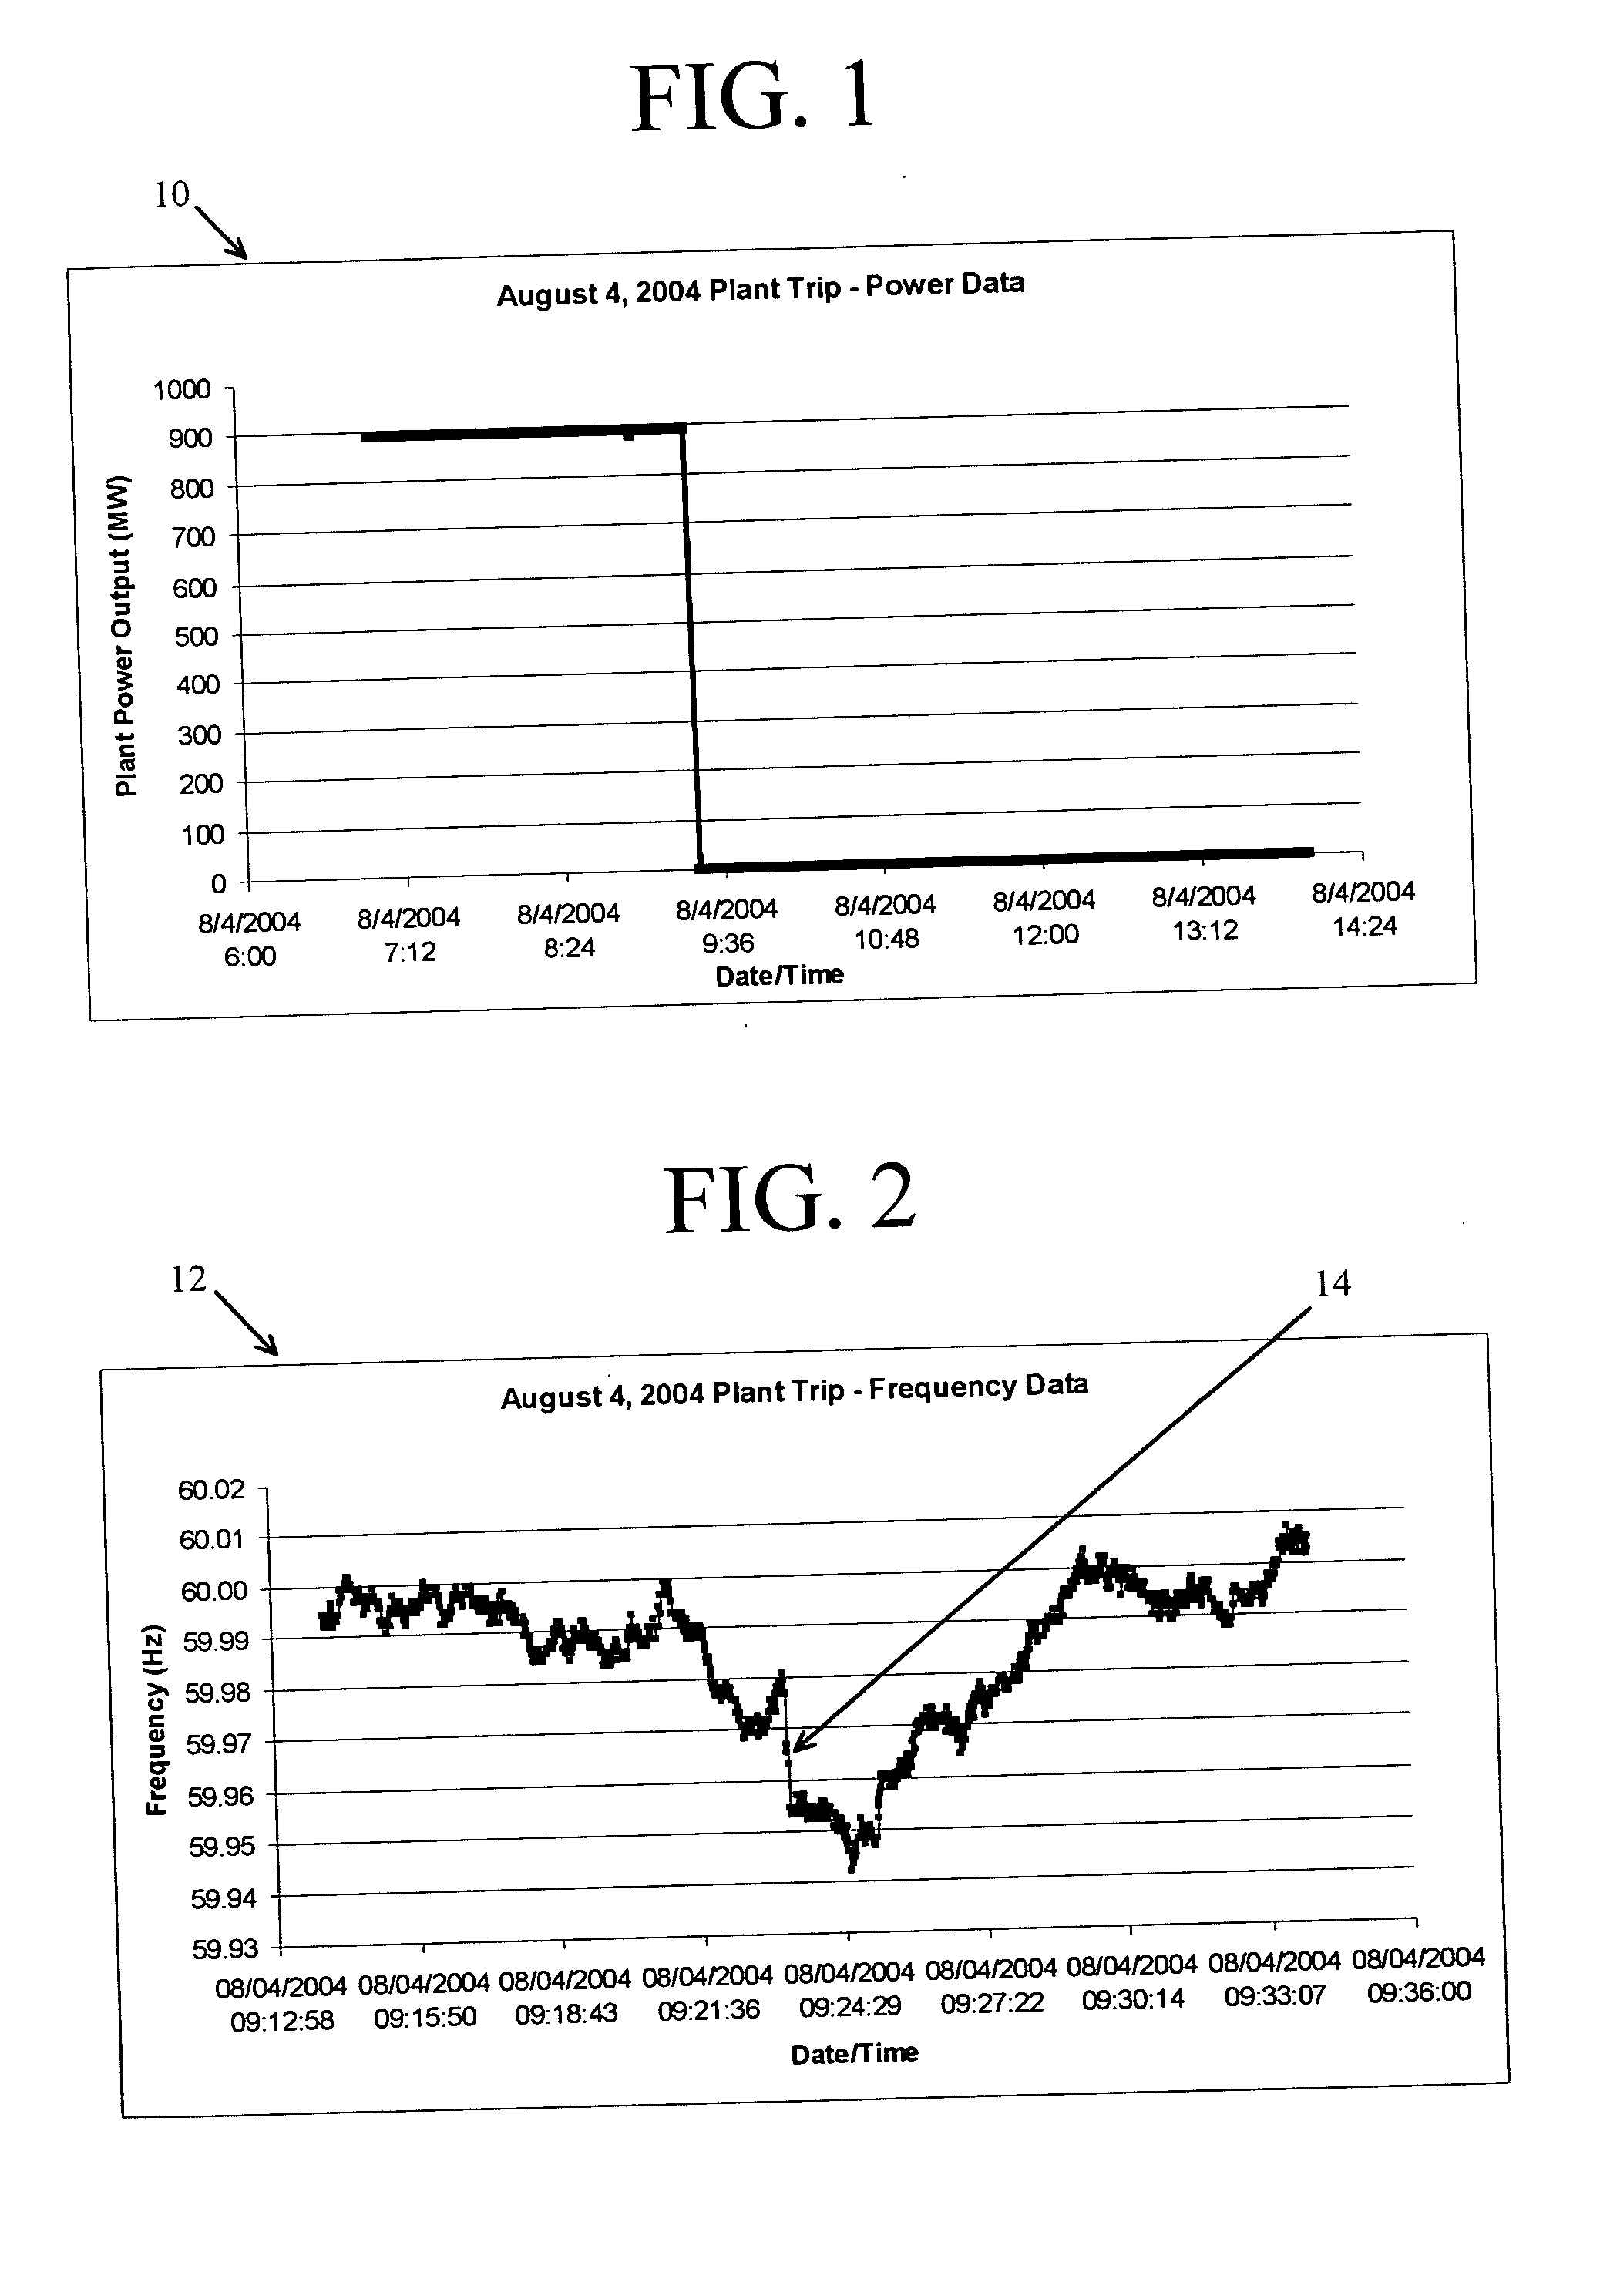 Method and system for AC power grid monitoring